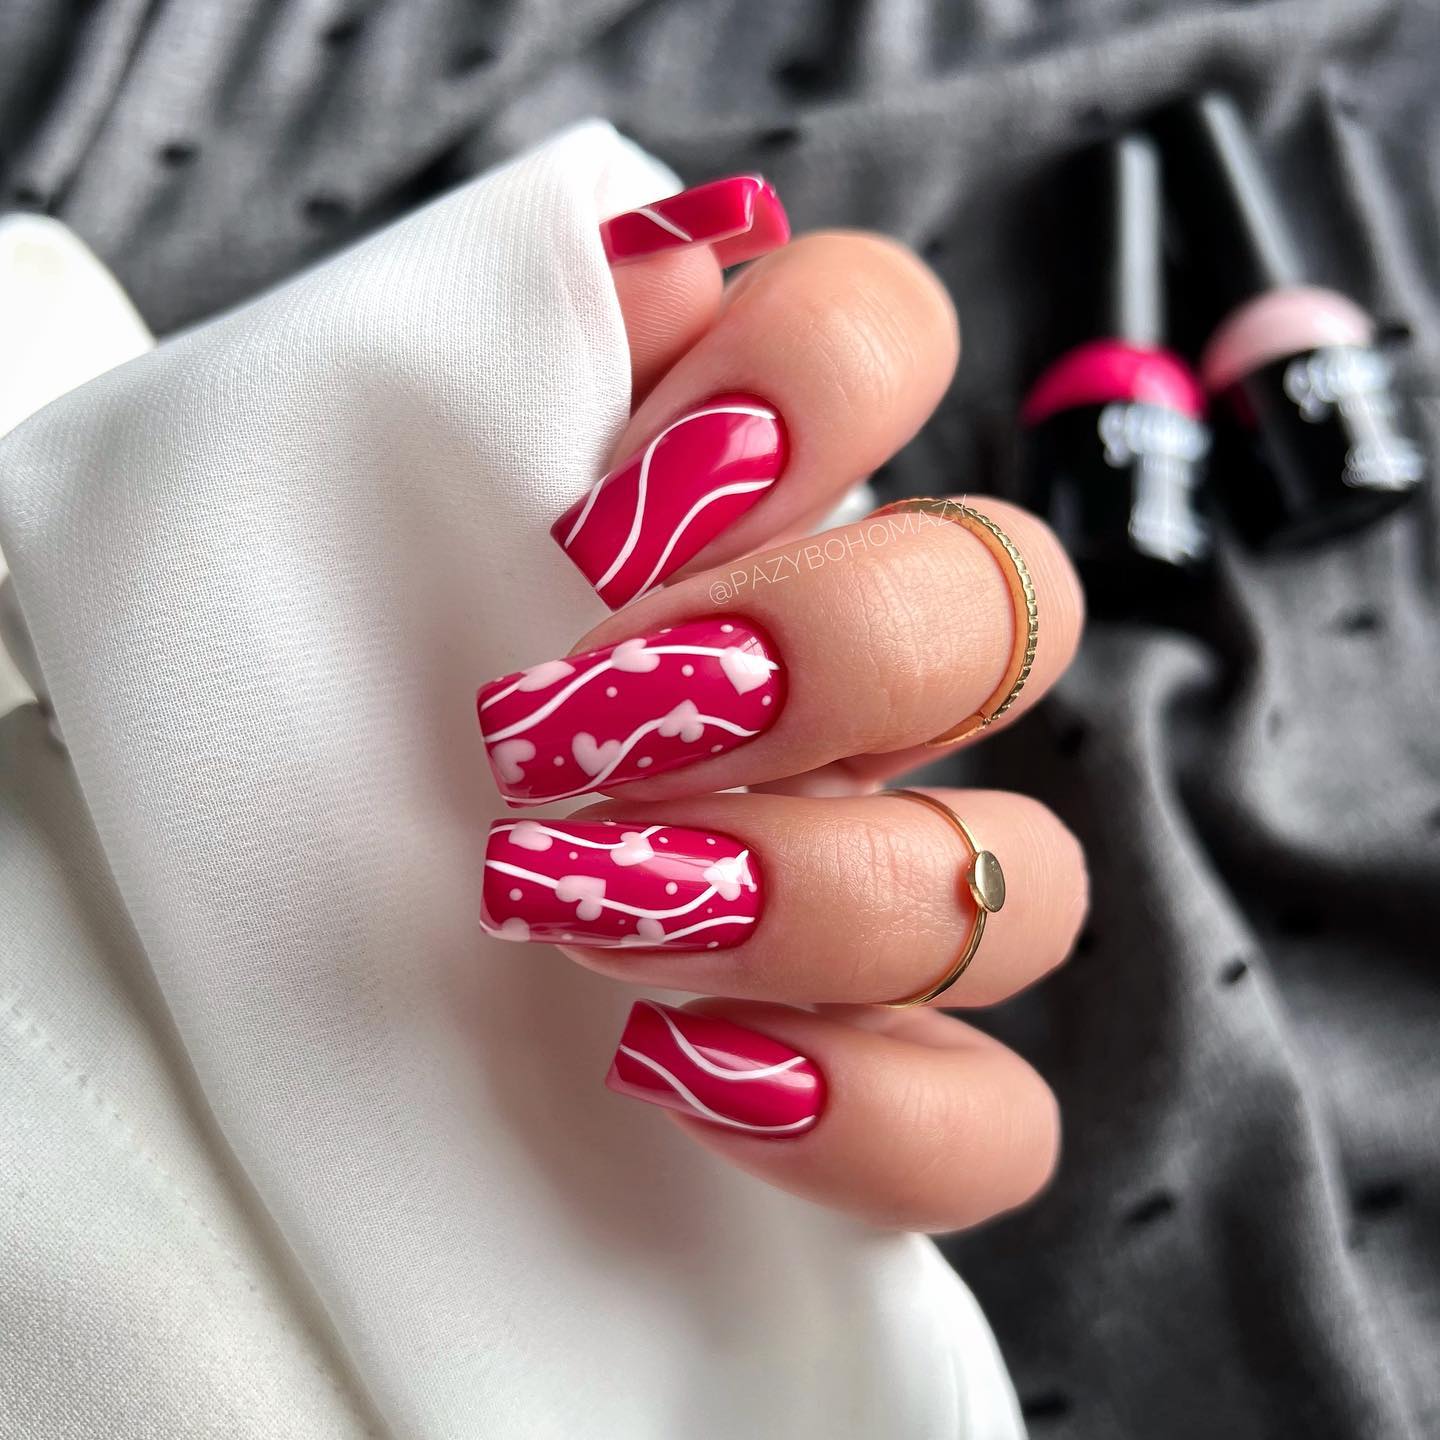 Long Square Red Nails with White Swirls and Hearts